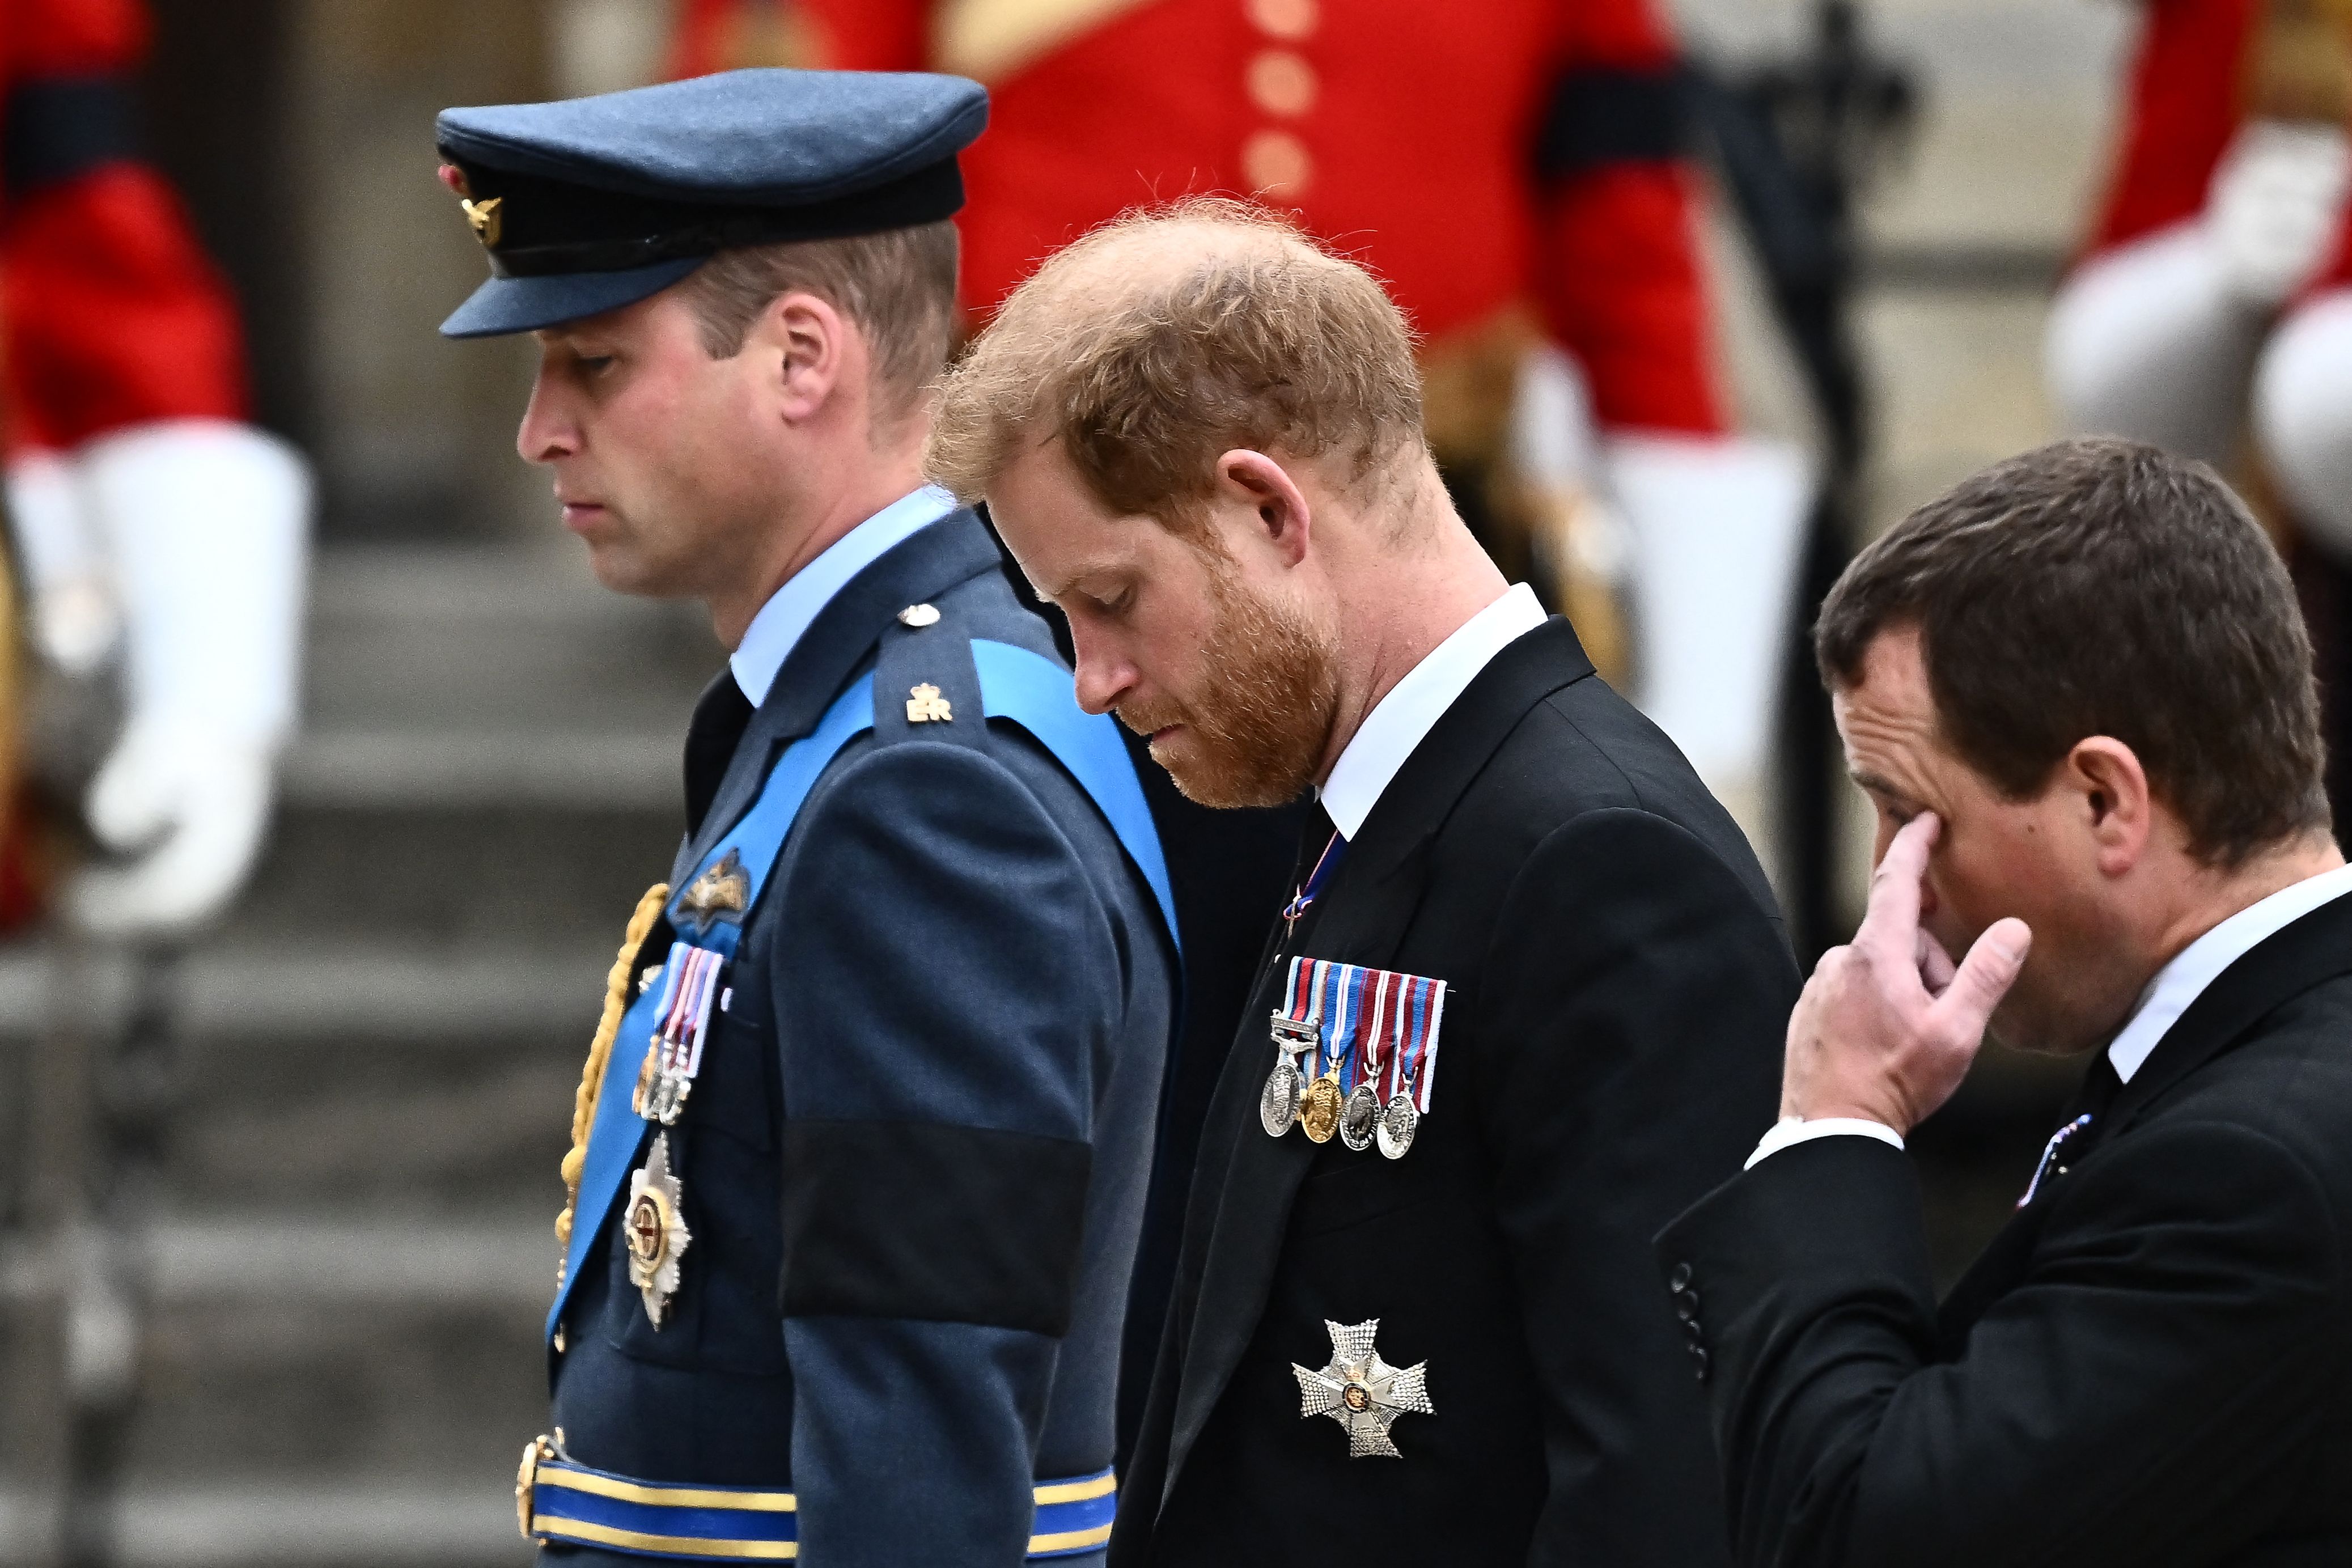 Prince William and Prince Harry at Westminster Abbey in London on September 19, 2022 | Source: Getty Images